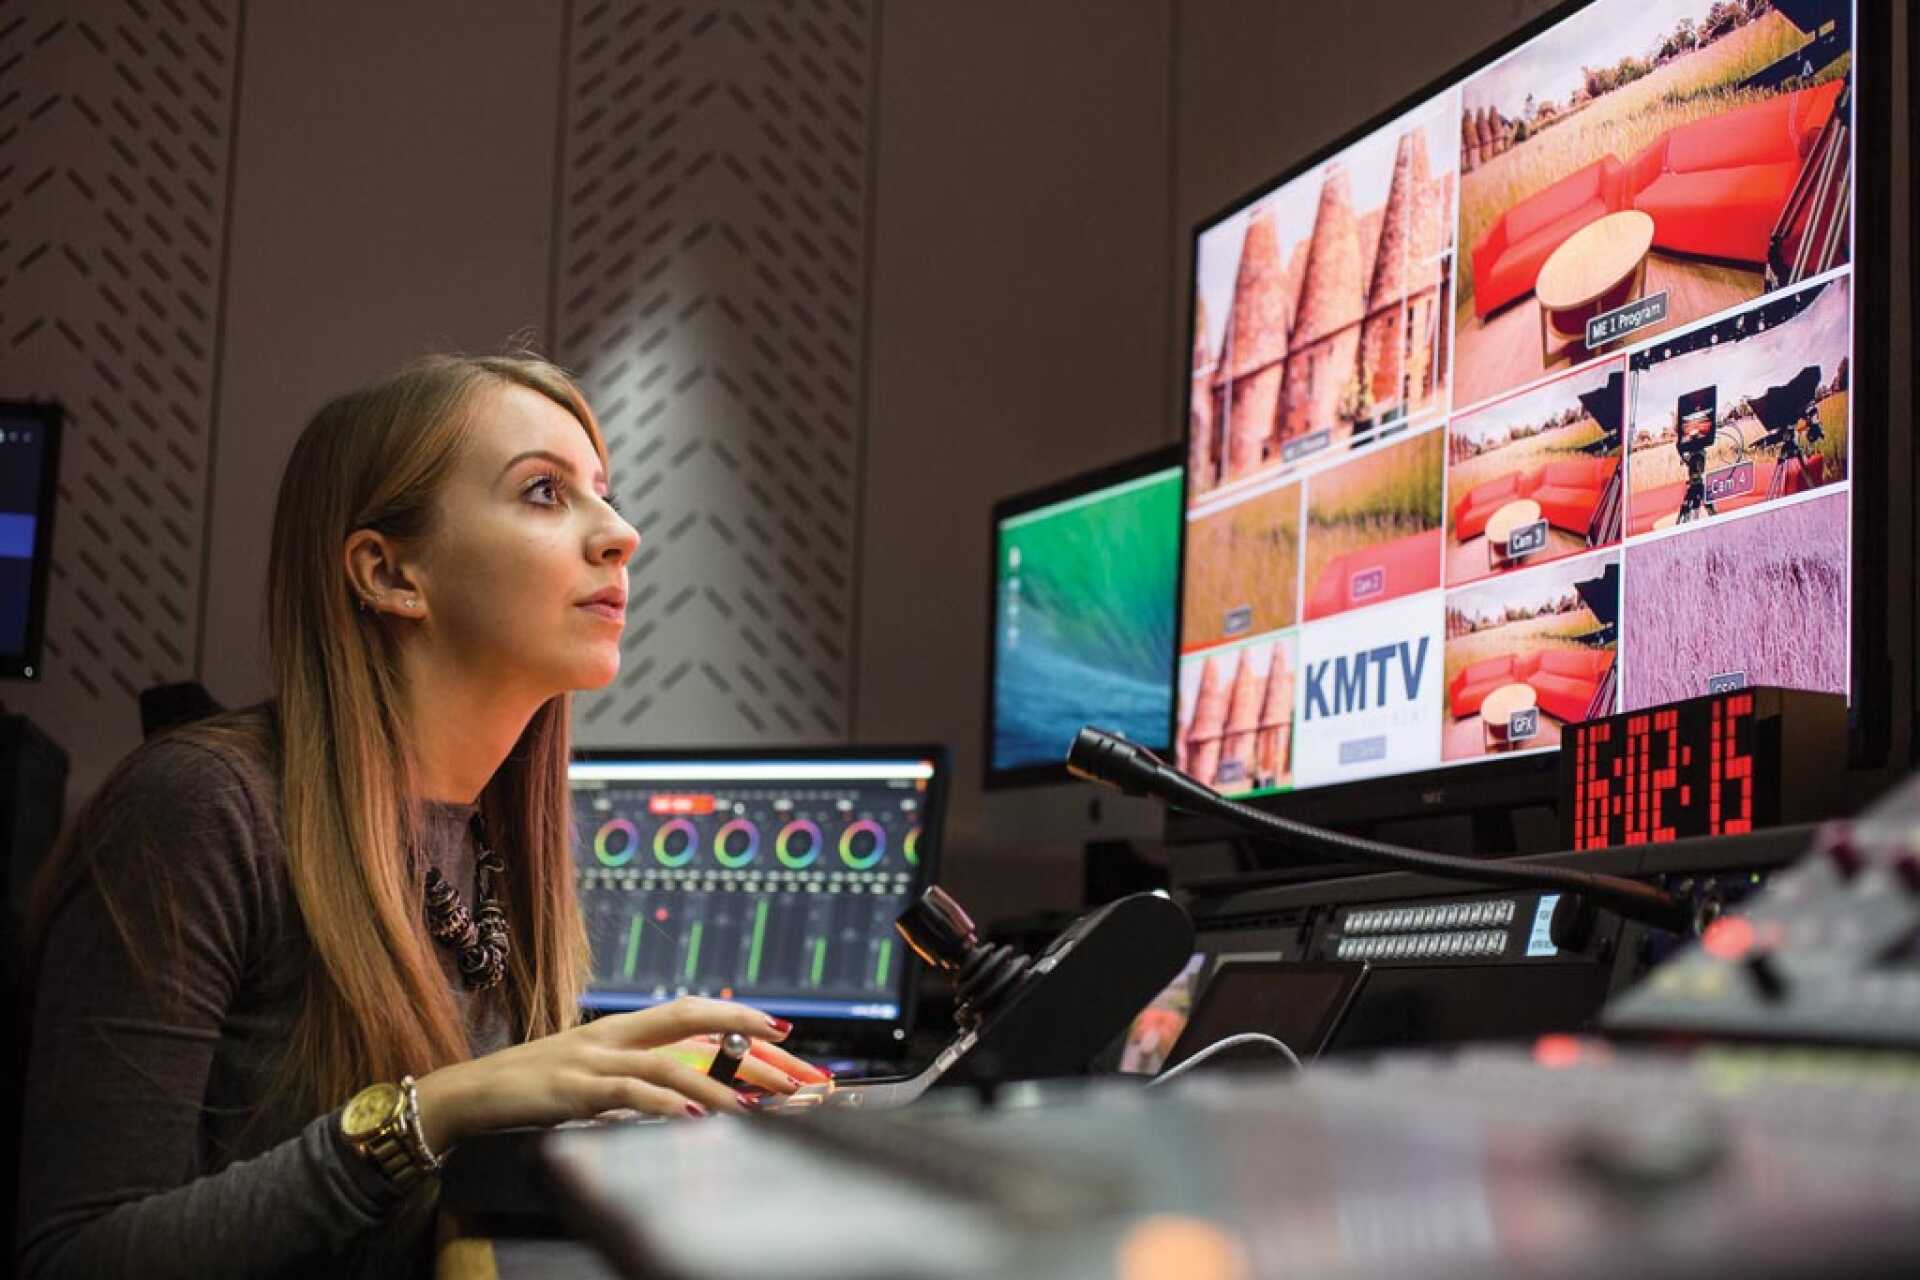 Student in a TV studio, monitoring screens